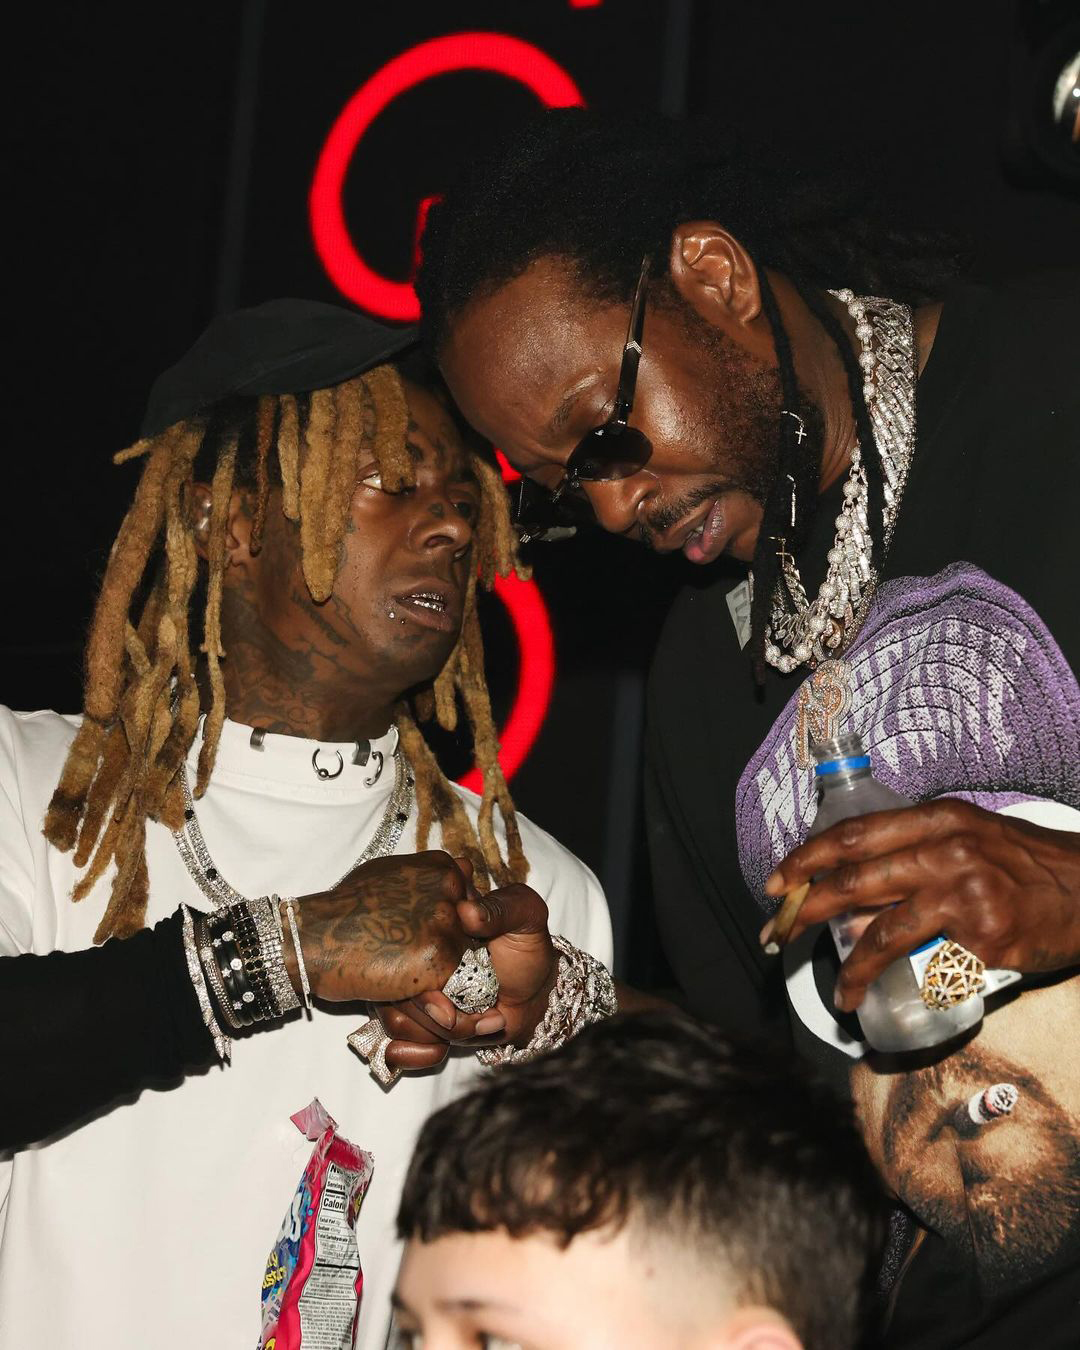 Lil Wayne & 2 Chainz Attend LIV On Sundays Party In Miami